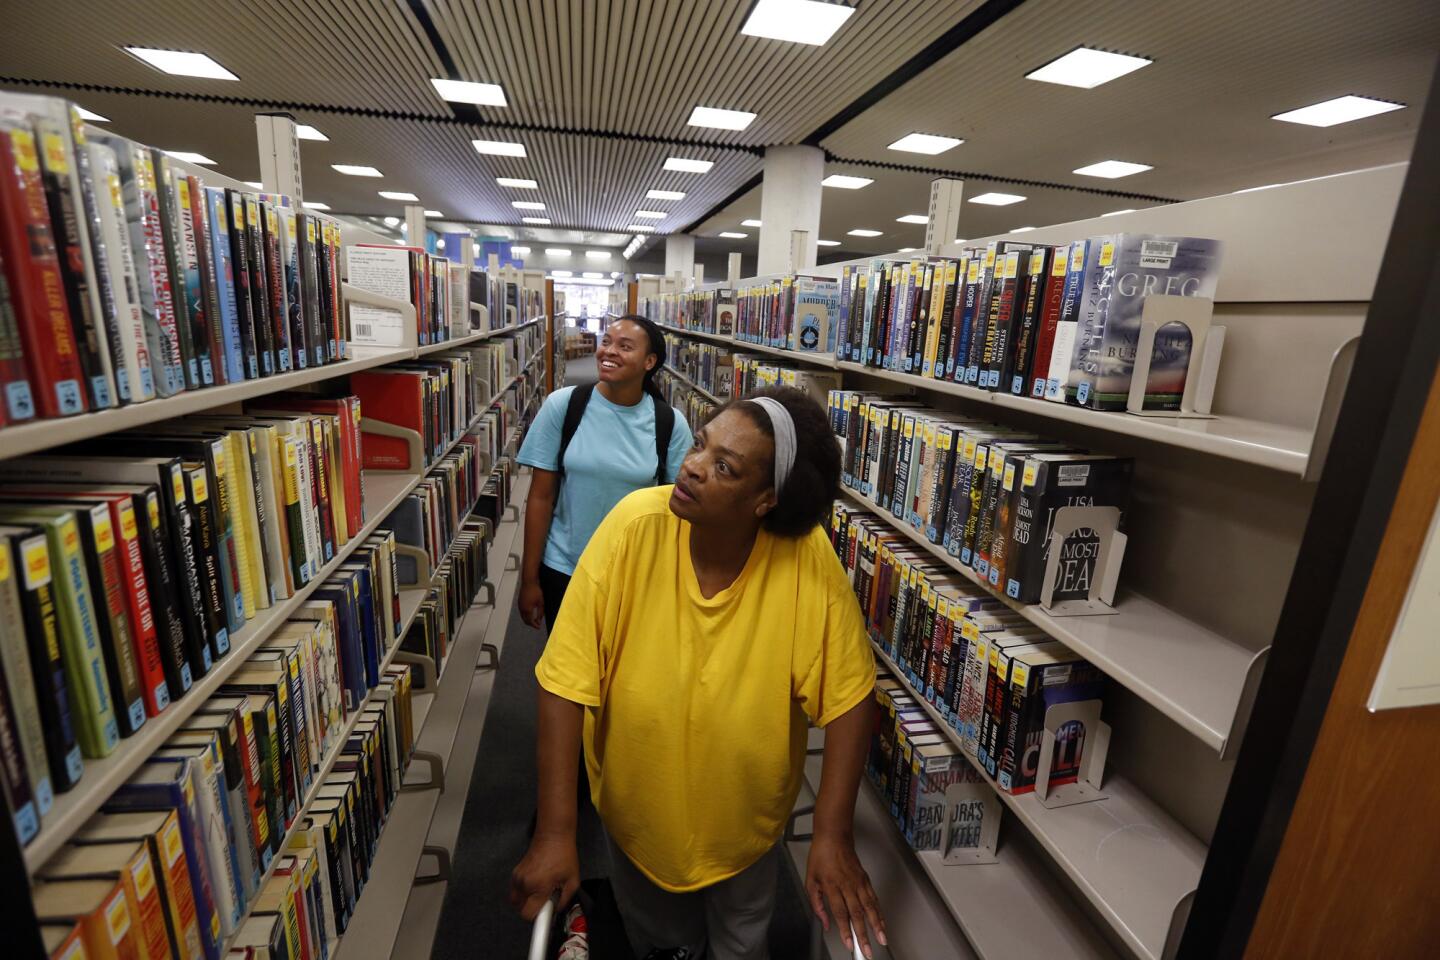 Cal State Long Beach student Shellv Candler, 28, in back, helps her mother, Genice Candler-Brown, 60, find mystery books at the Long Beach Public Library in July.